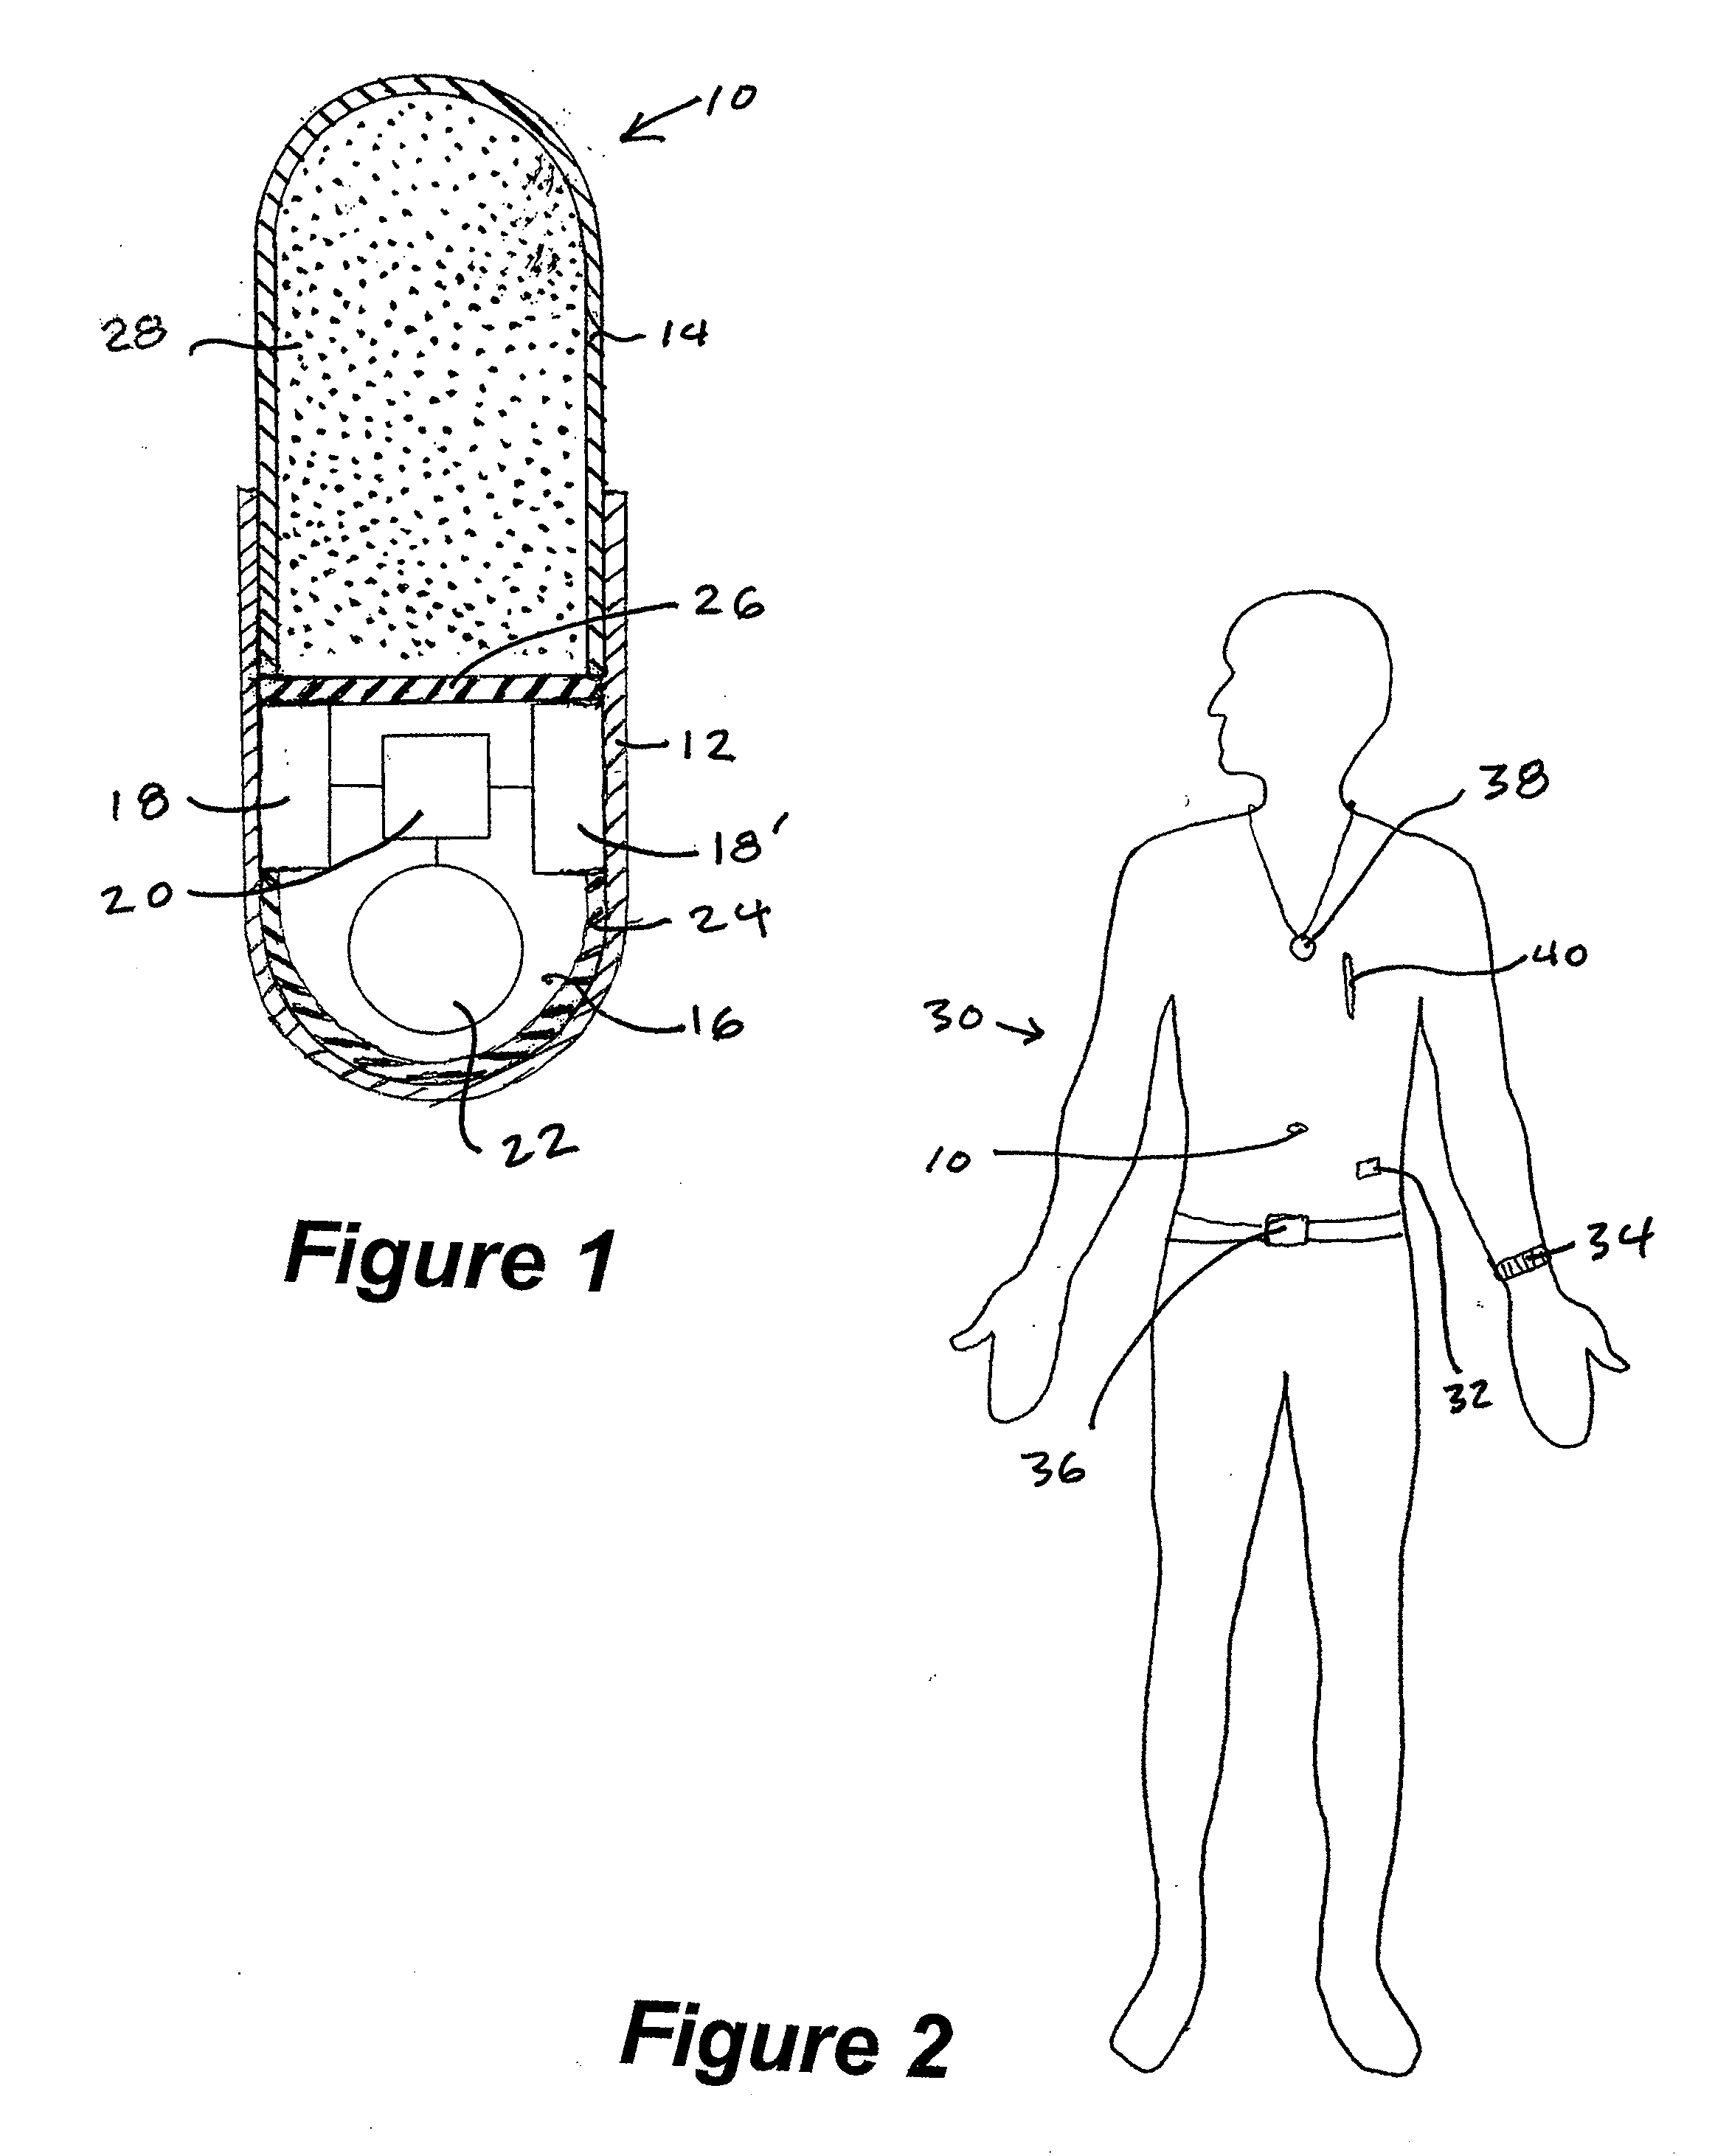 Method and system for monitoring and analyzing compliance with internal dosing regimen